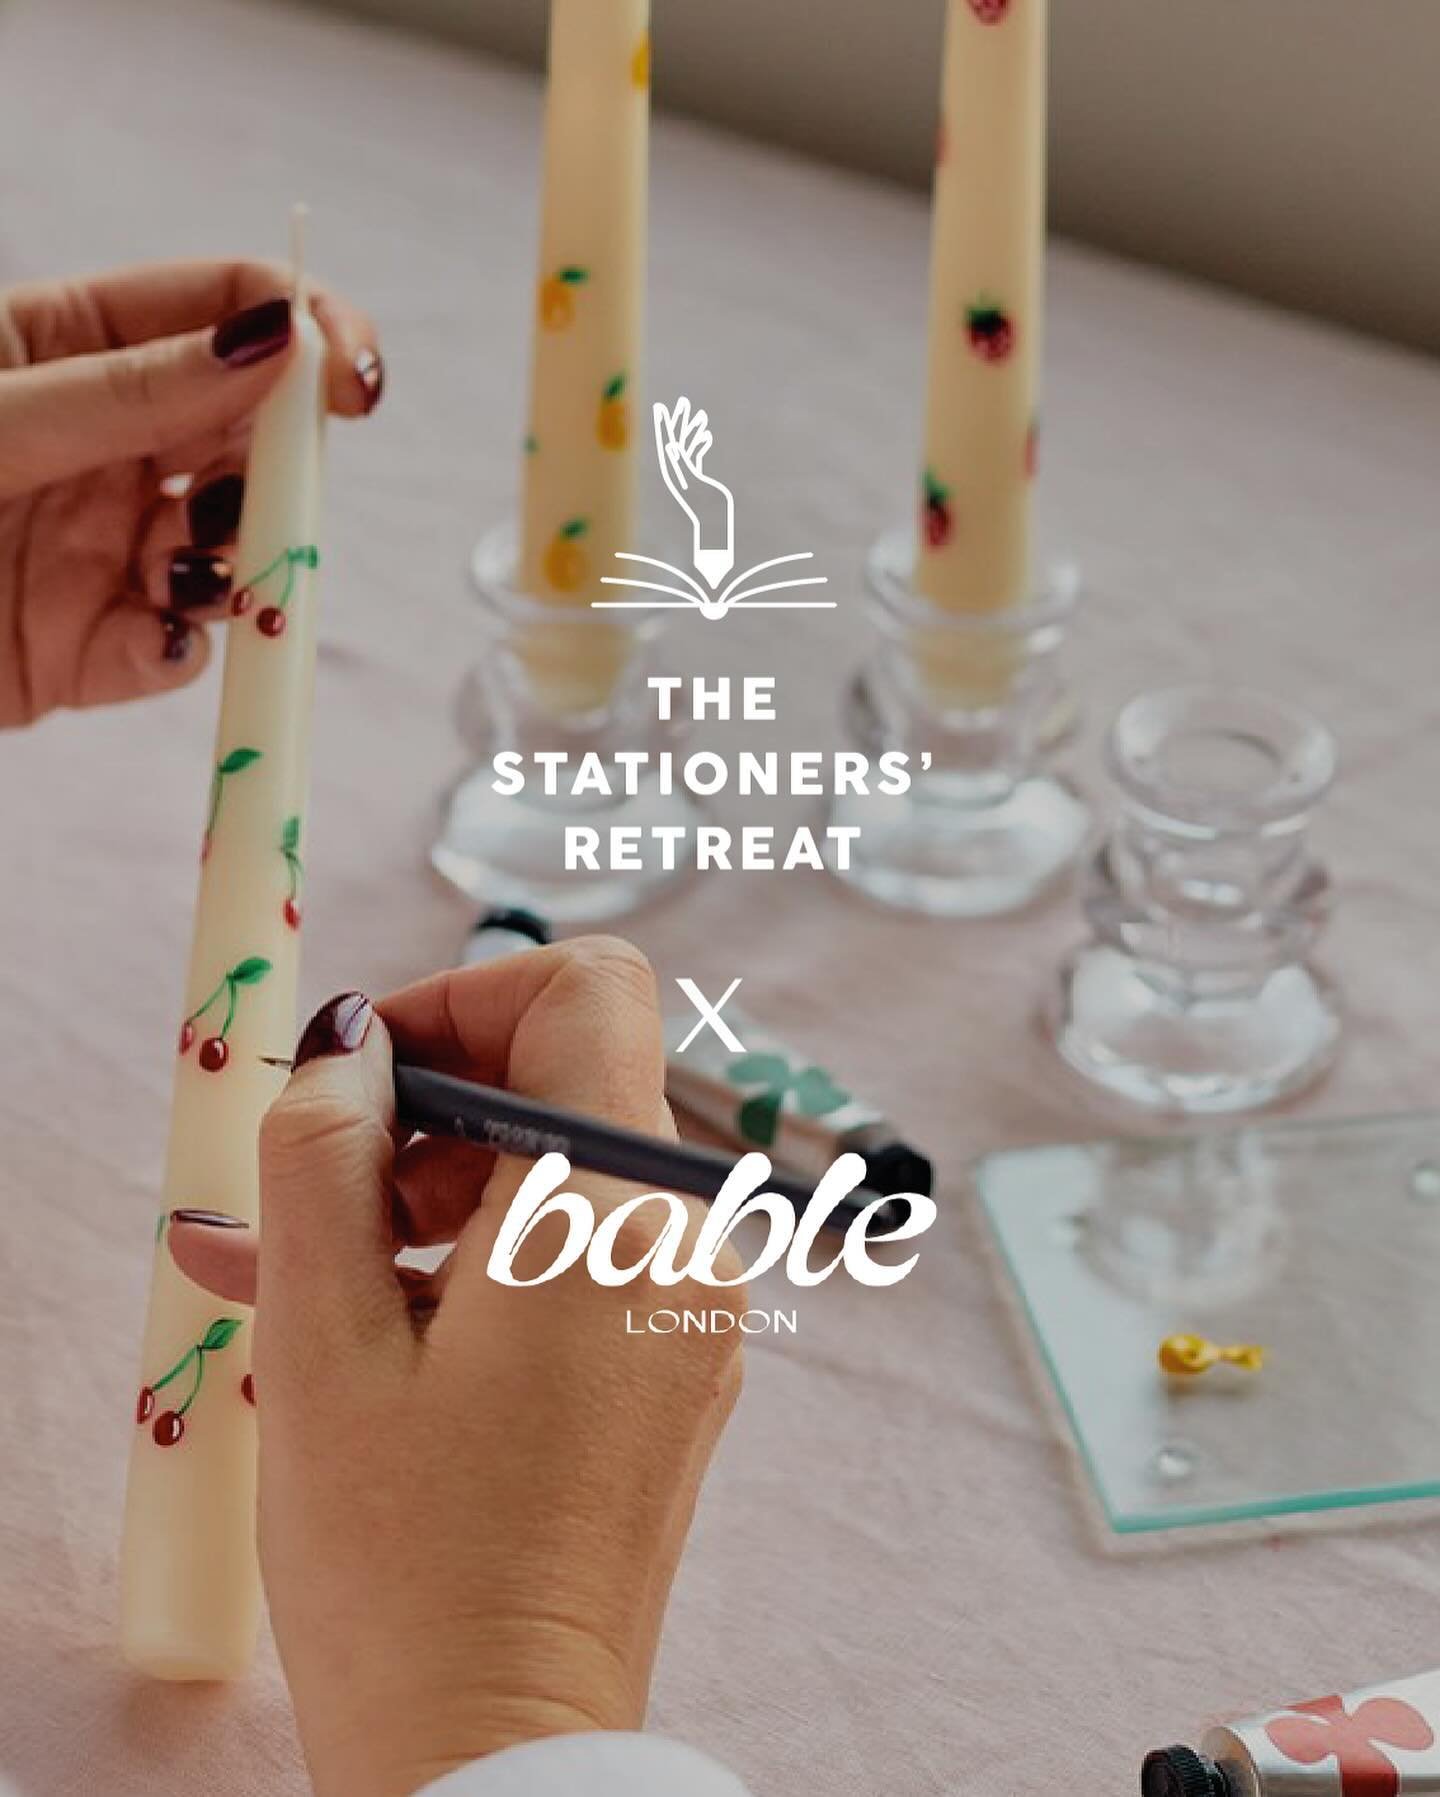 🎨 Suite Press x Bable London ~ This year we are raising the bar and are THRILLED to have snapped up the incredible Bianca from Bable to join us for a fun filled creative candle painting session. Bianca has grown her hand painted candle business into